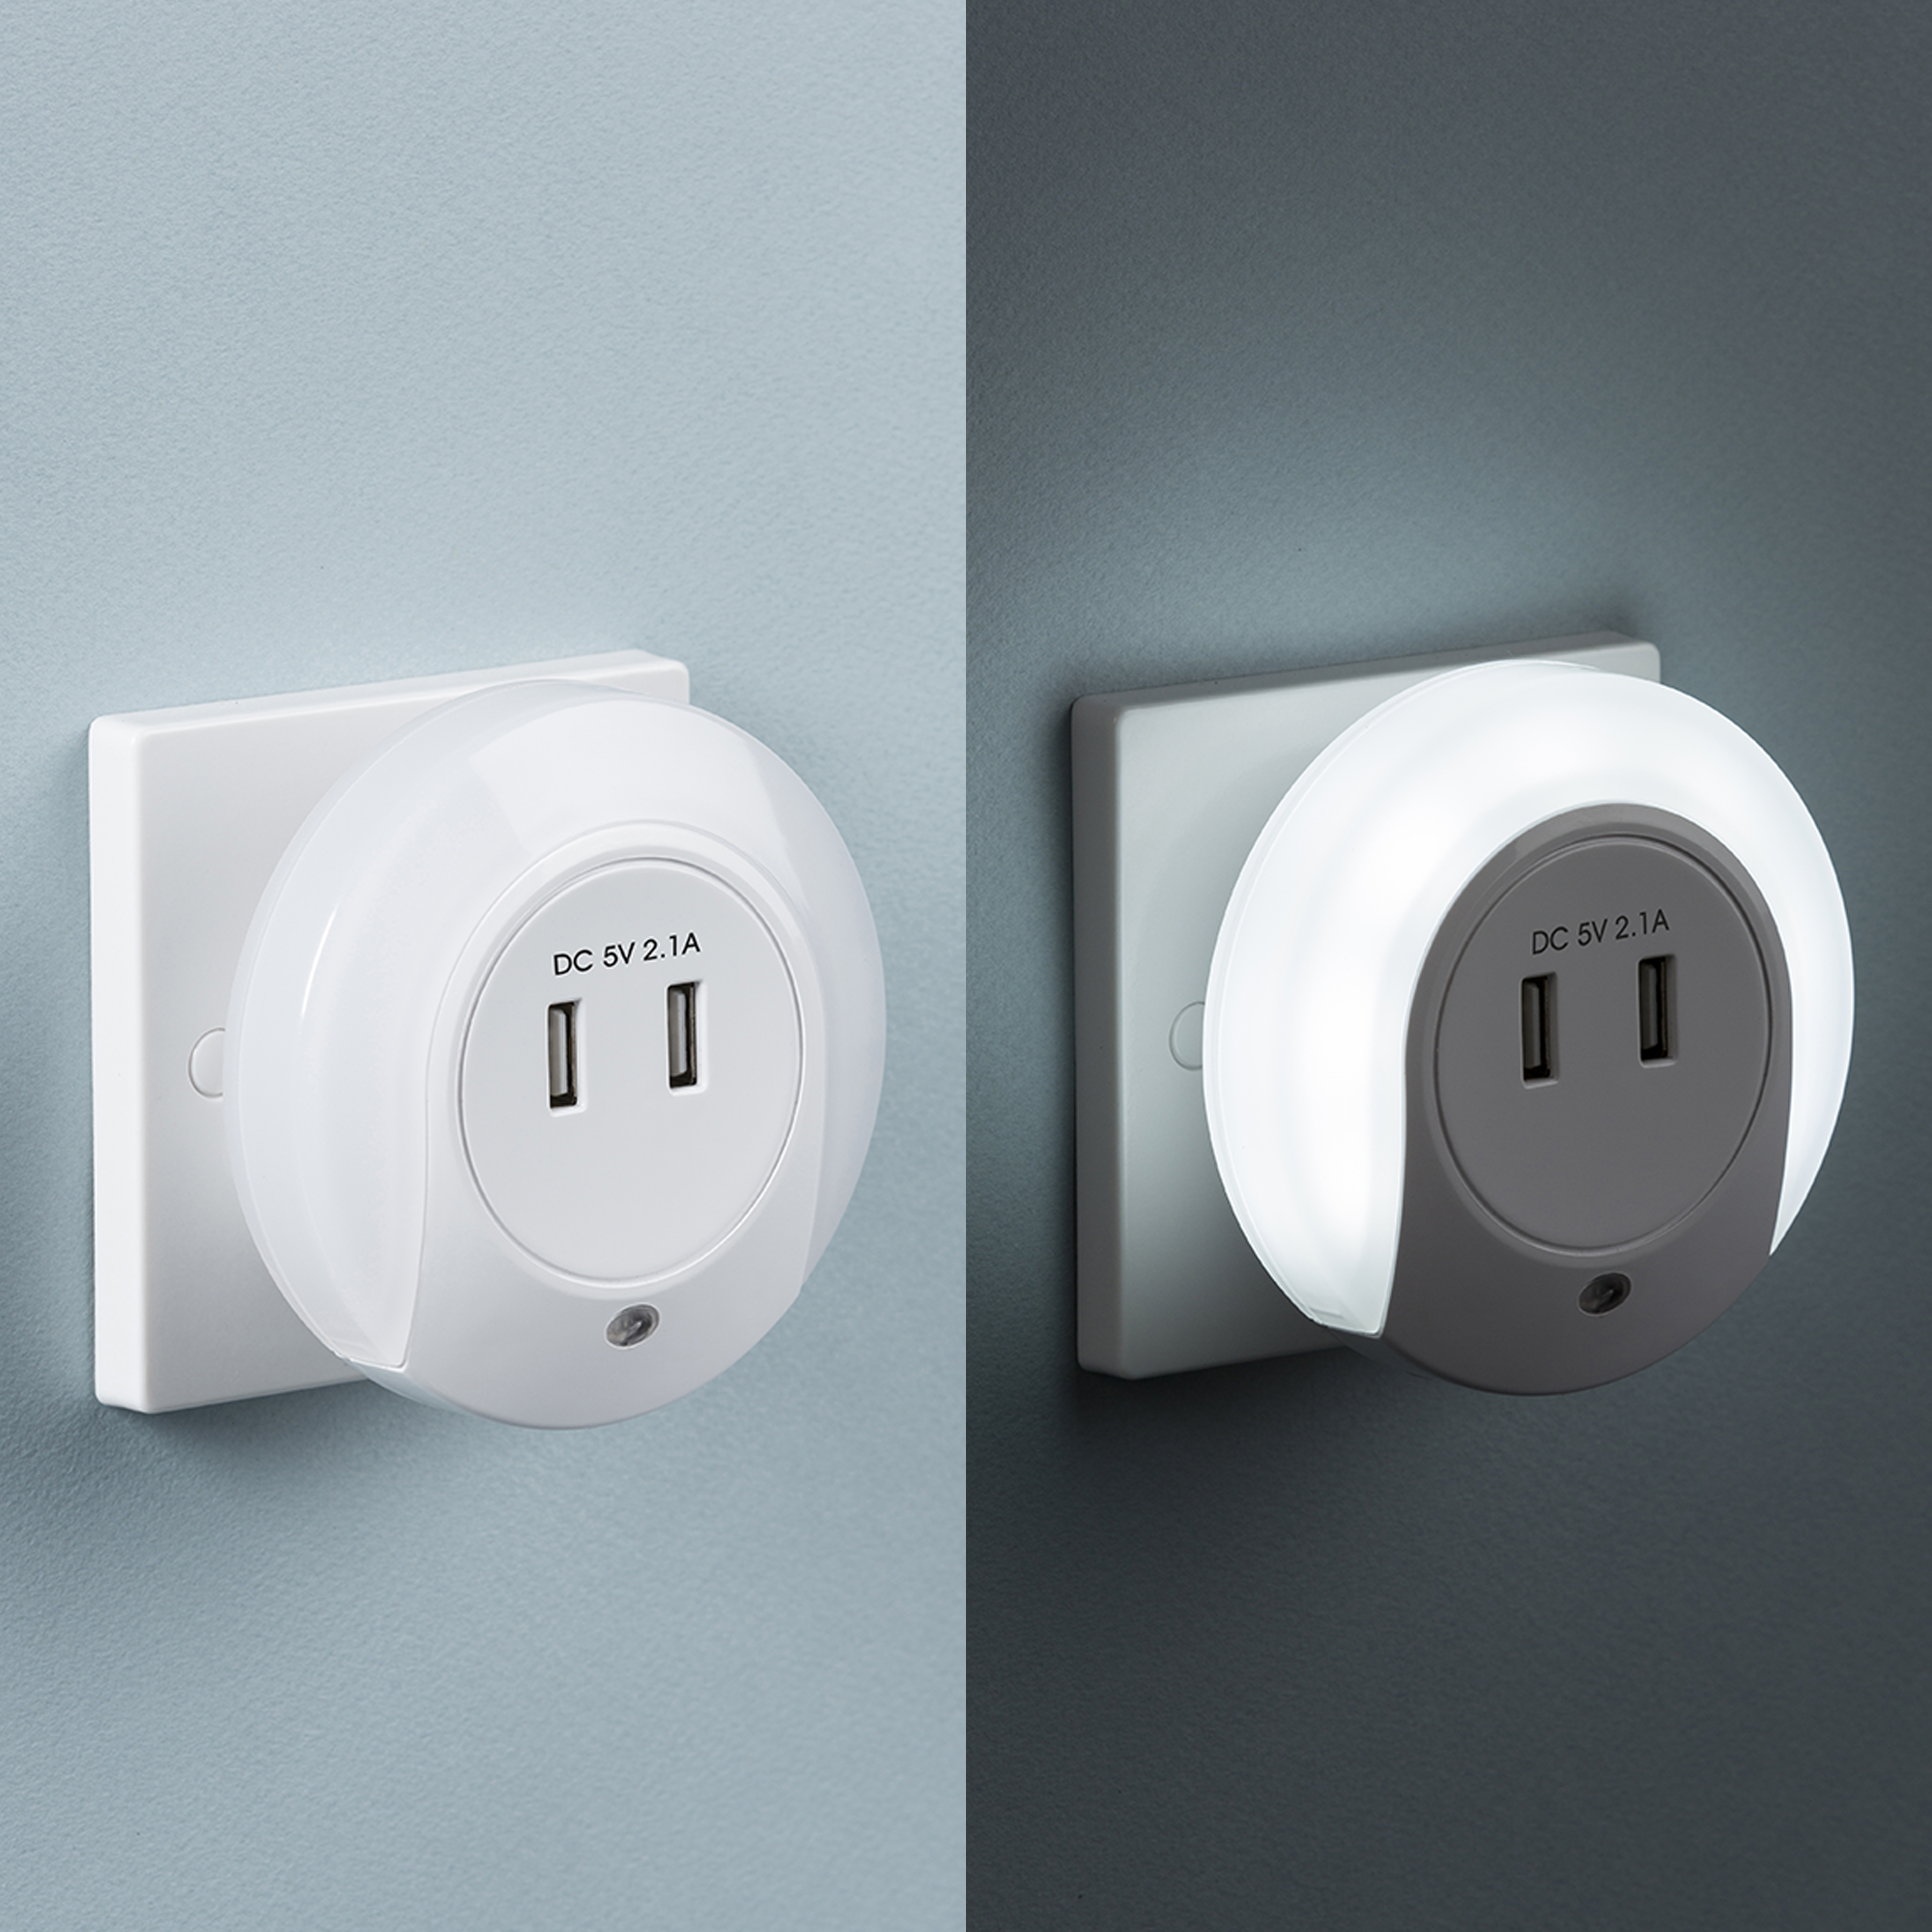 ML Accessories-NL002 Plug in LED Night Light with Dual USB Charger Ports 5V DC 2.1A (shared)